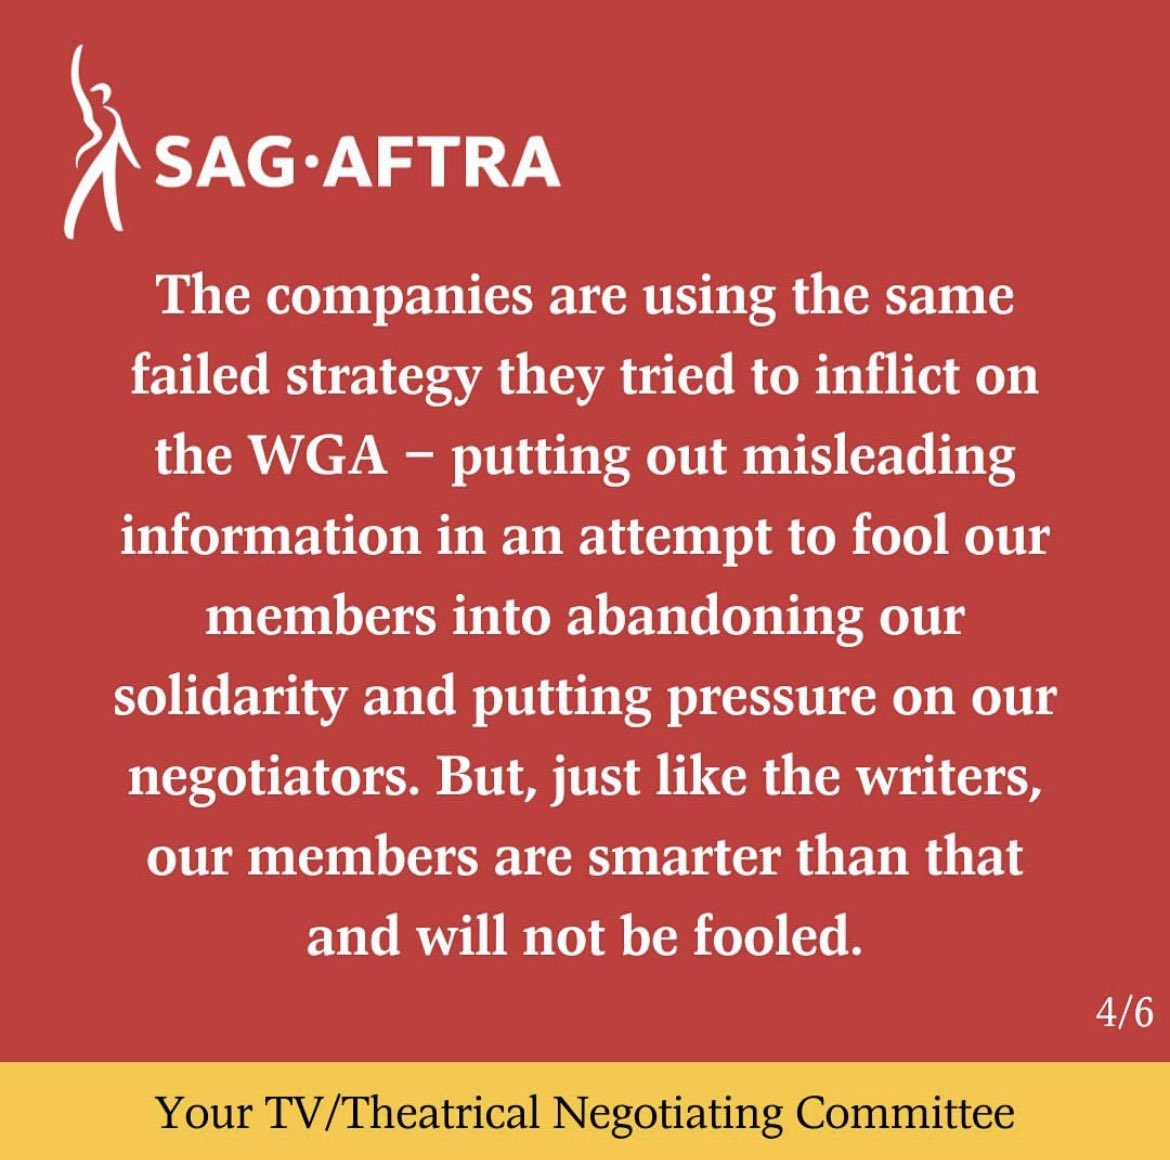 Update on the negotiations. Thank you @sagaftra for standing strong for all of us, the members✊🏾✊🏾✊🏾